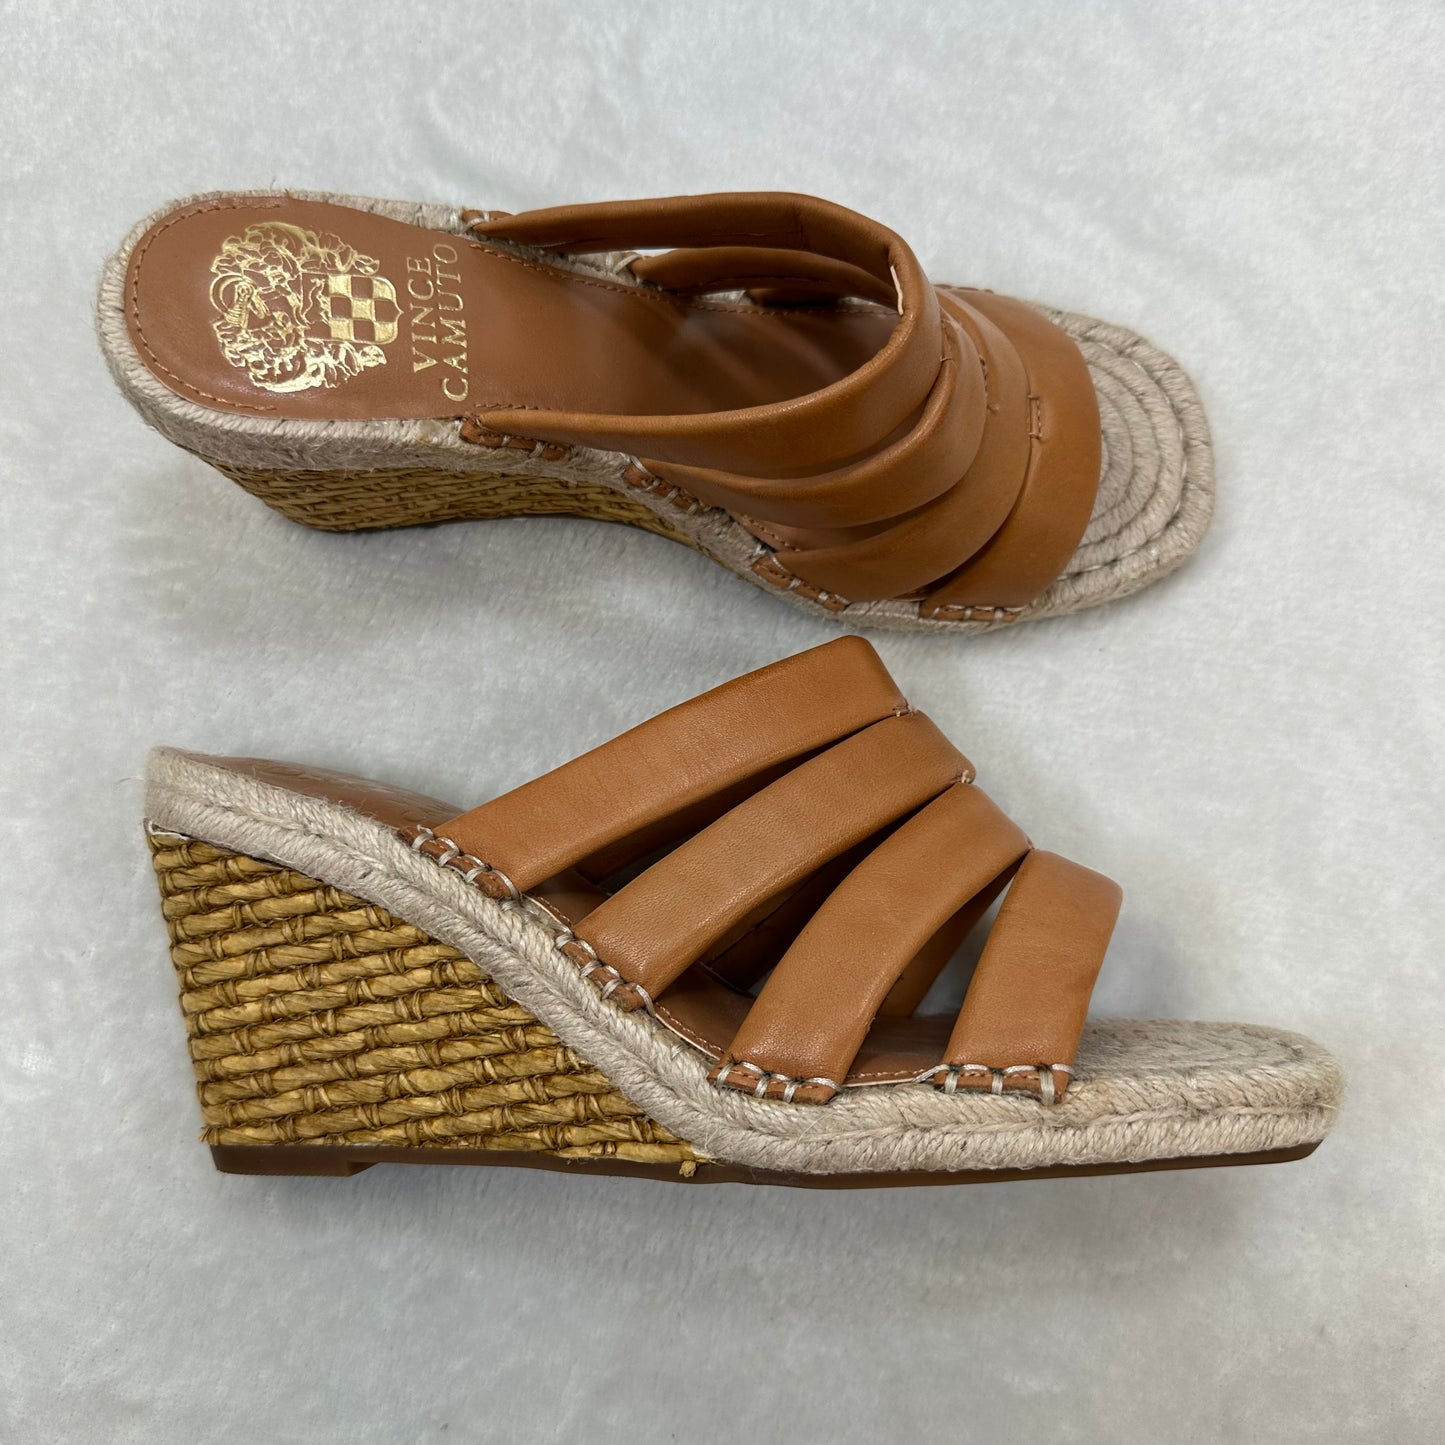 Sandals Heels Wedge By Vince Camuto  Size: 6.5